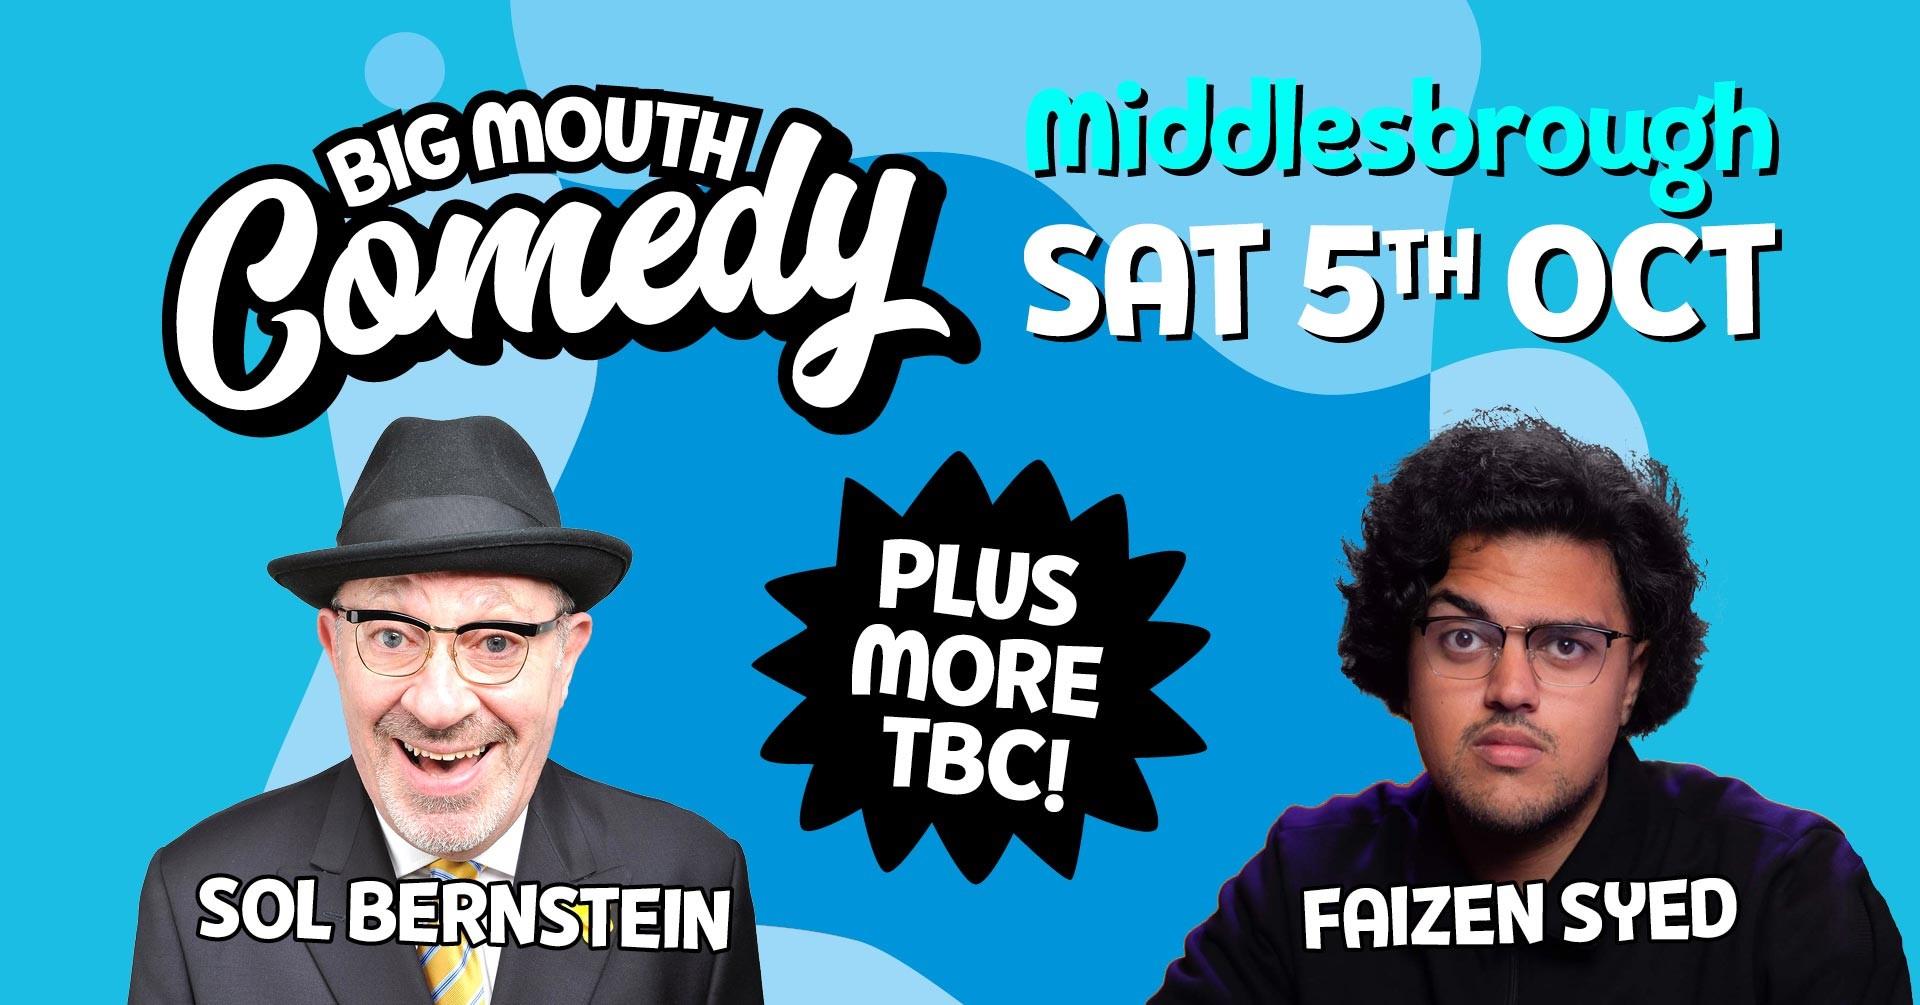  Big Mouth Comedy Club – October